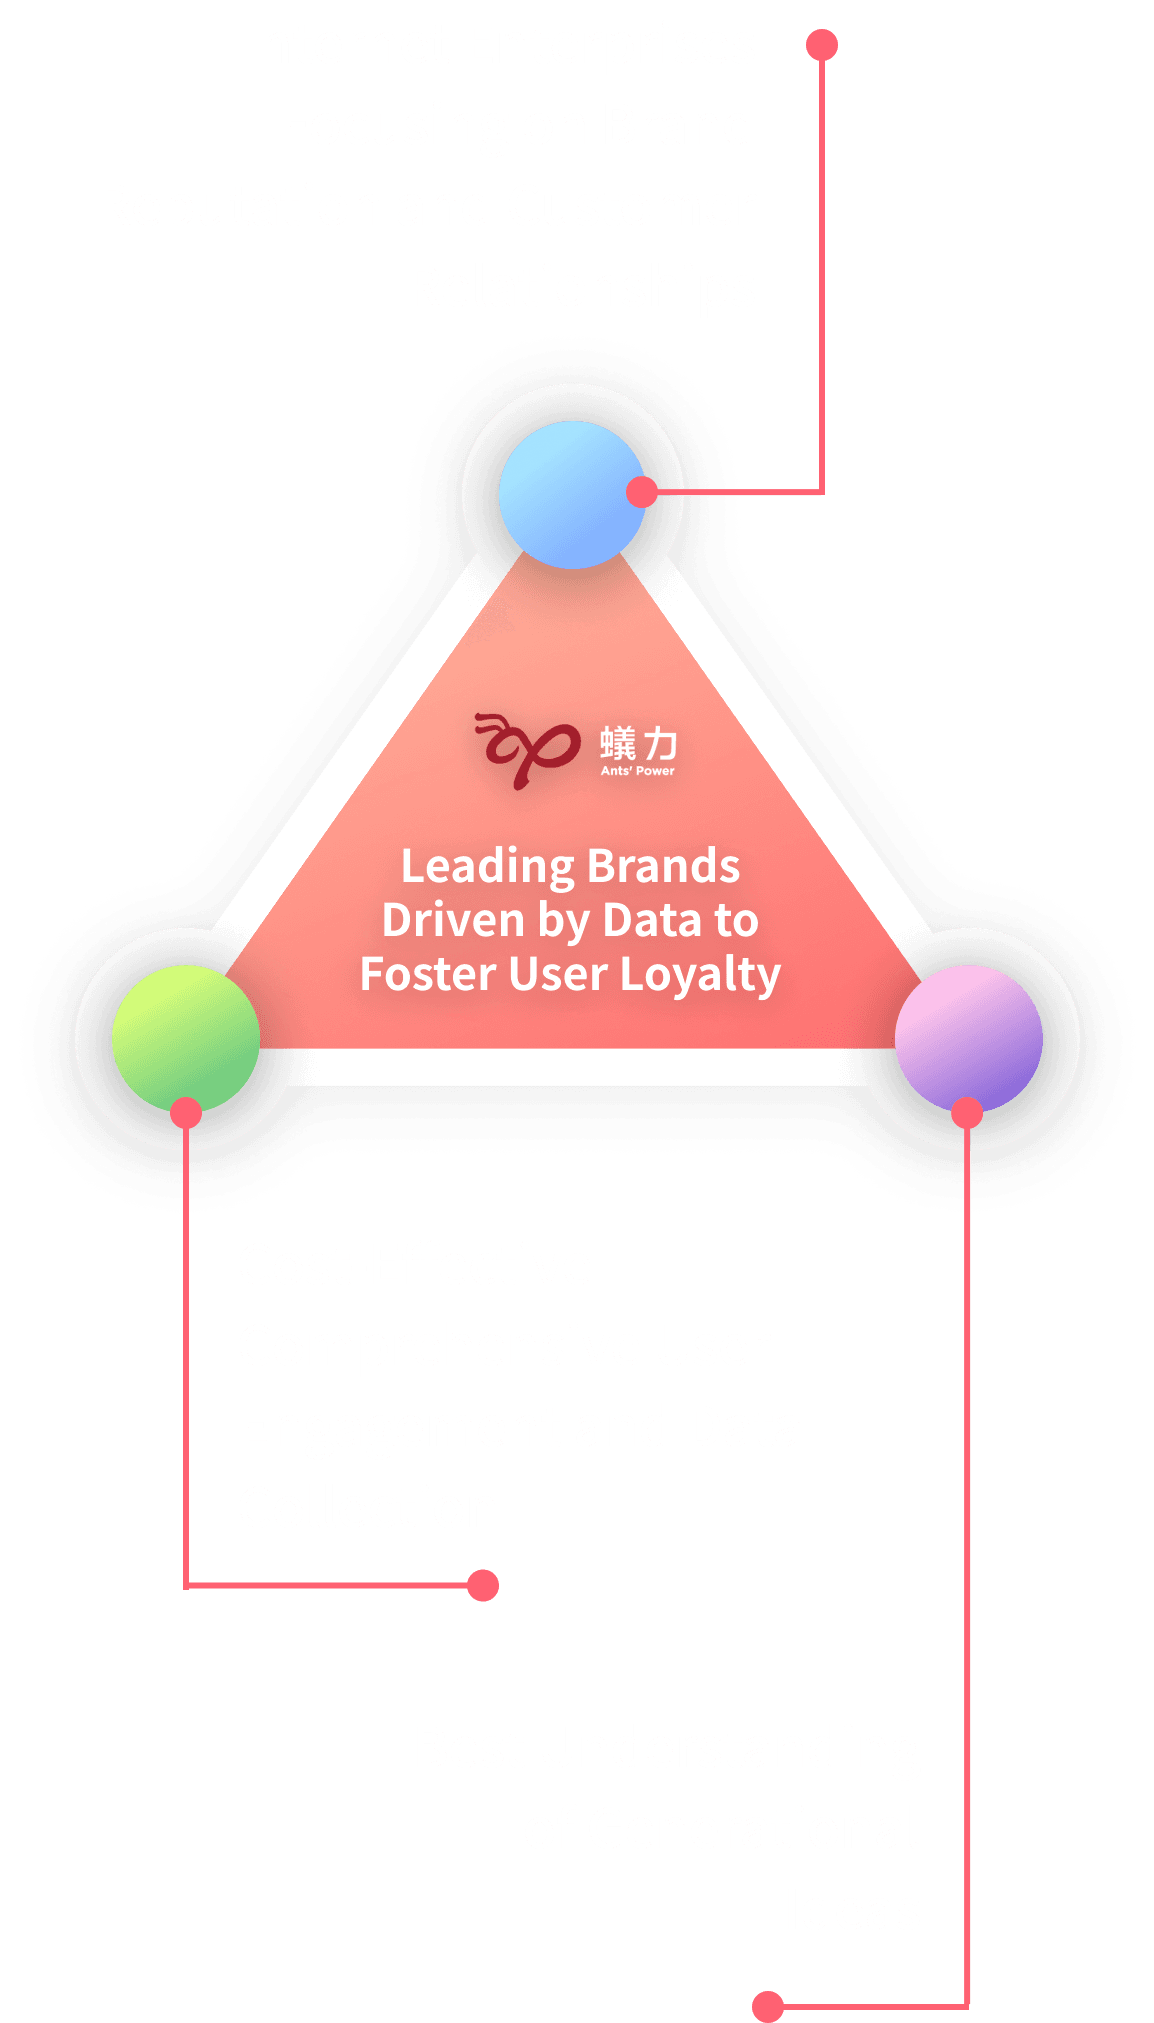 Leading Brands Driven by Data to Foster User Loyalty